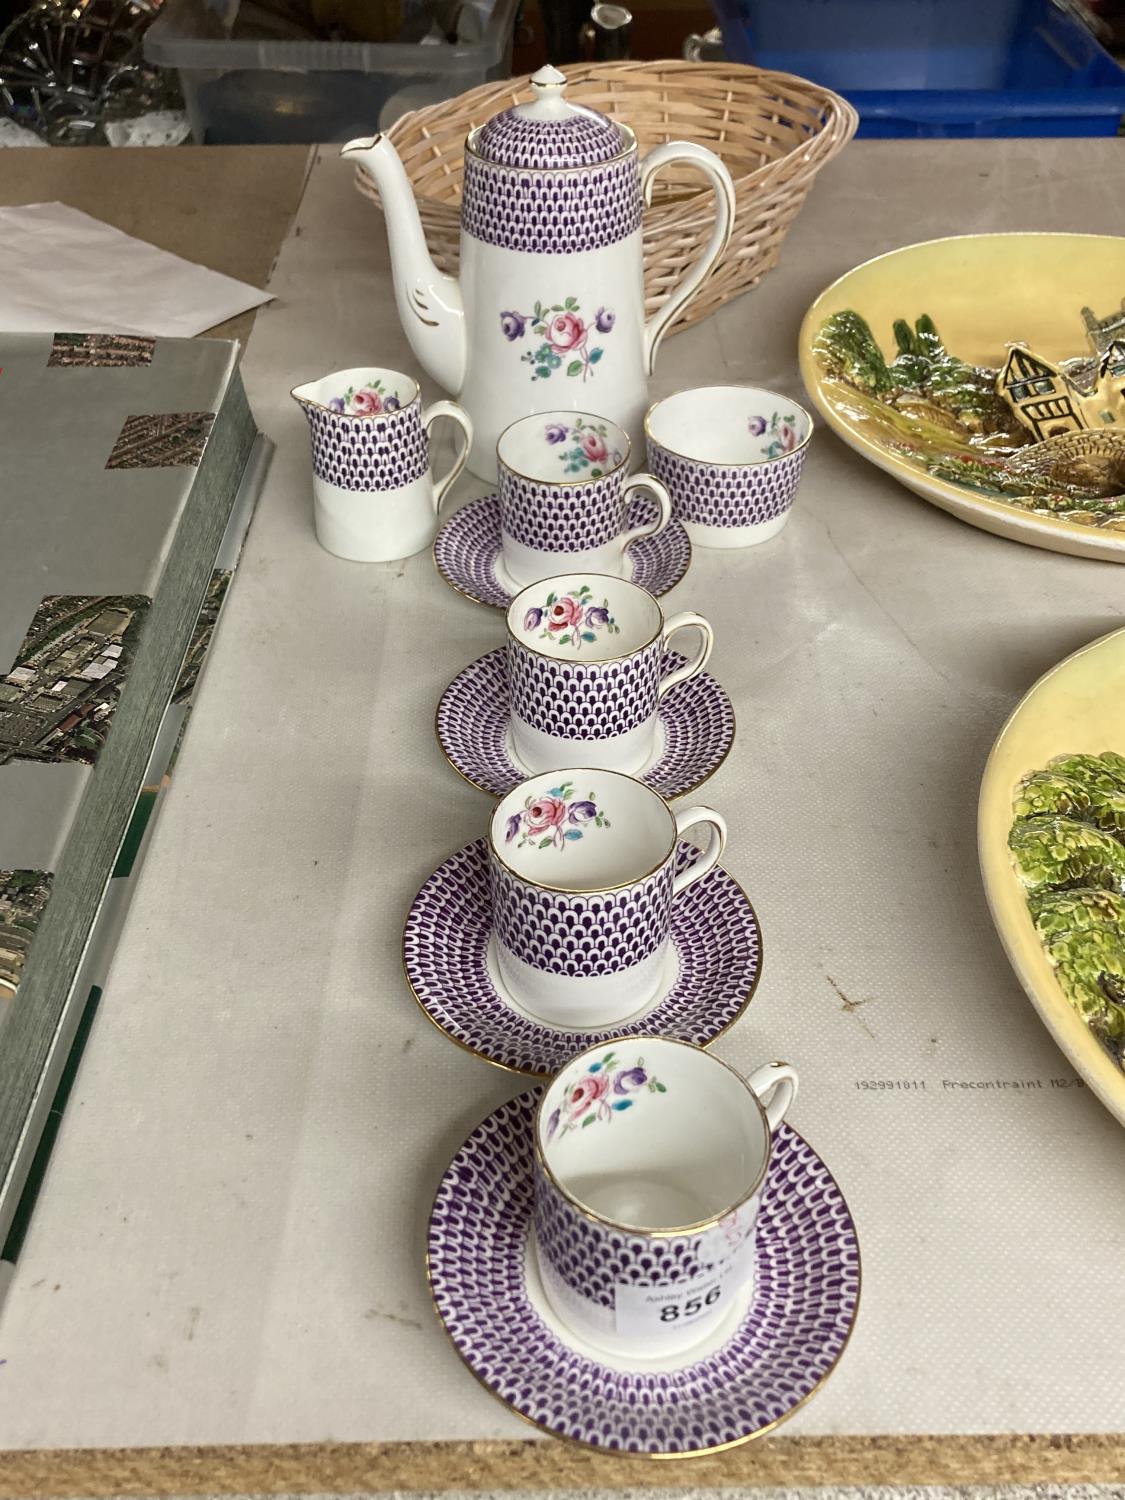 A NELSON CHINA PURPLE AND FLORAL COFFEE SET TO INCLUDE A COFFEE POT, CREAM JUG, SUGAR BOWL AND